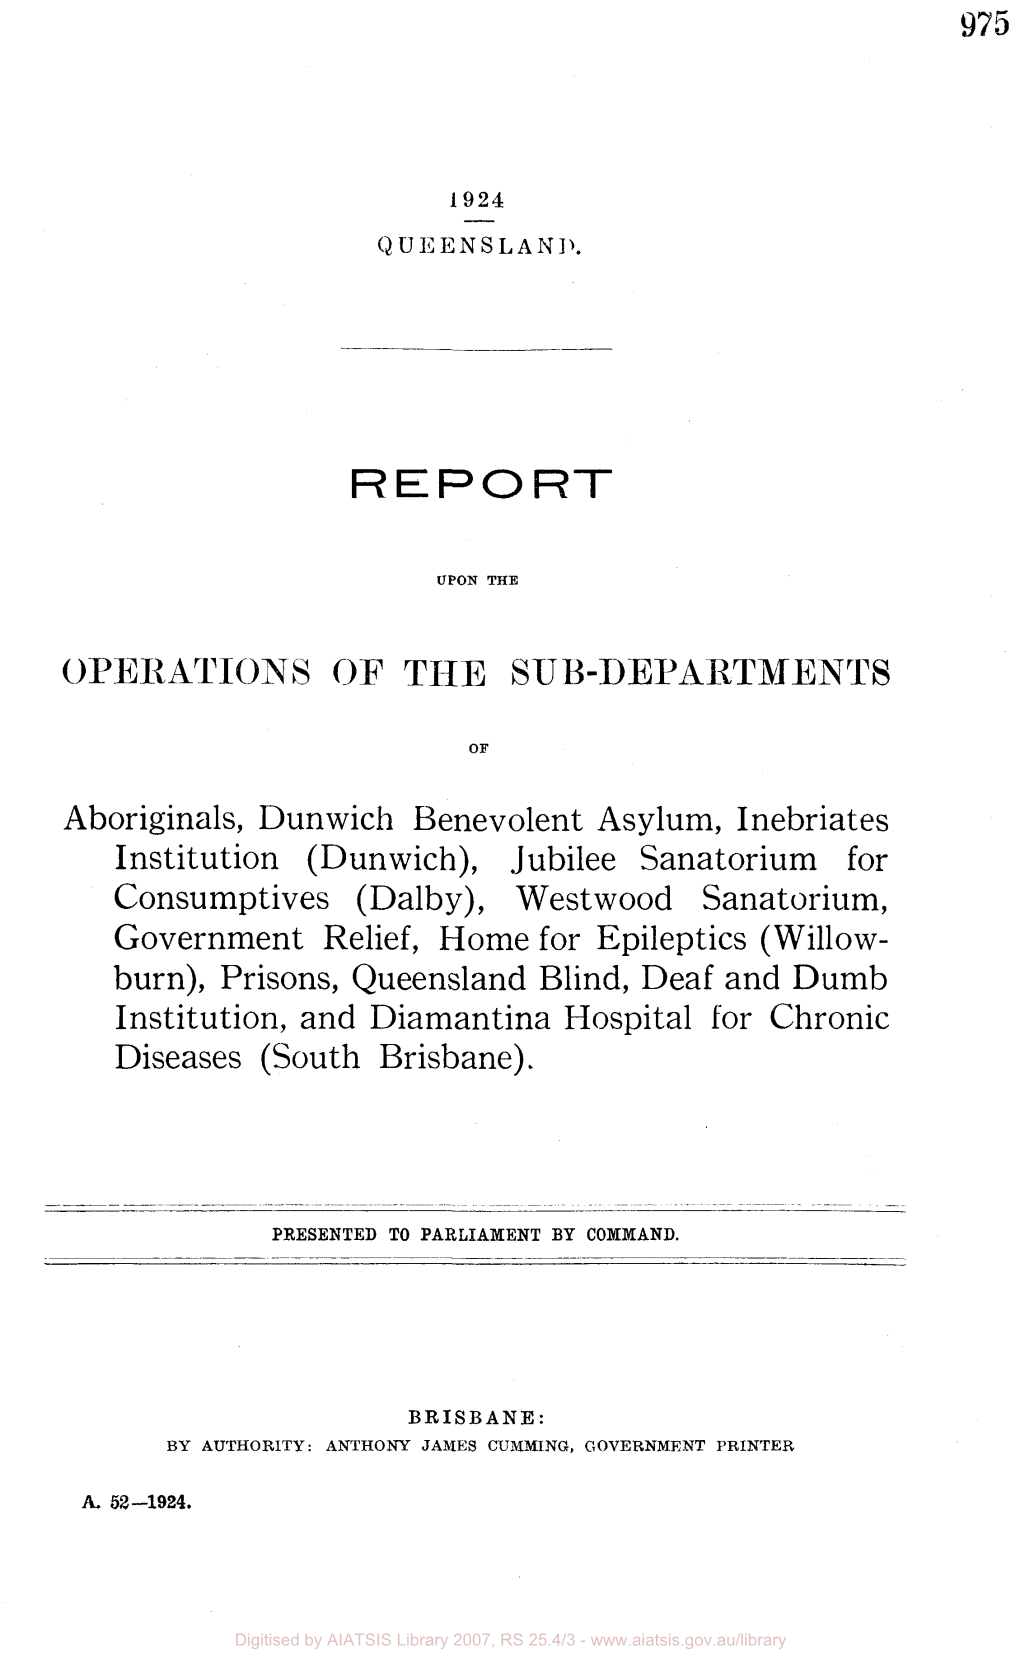 Report Upon the Operations of Certain Sub-Departments of the Home